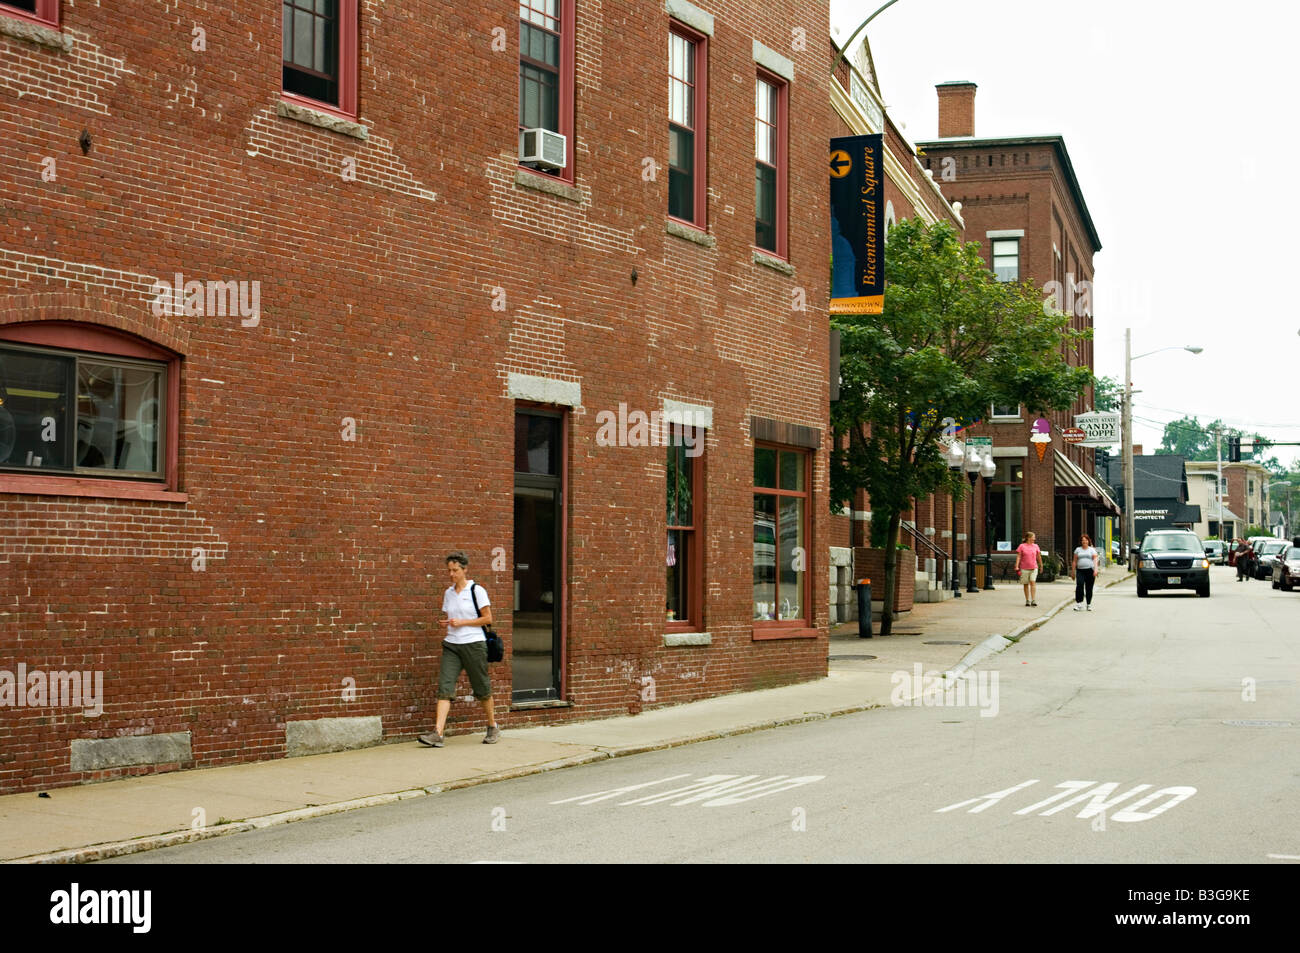 View down a side street in Concord NH US showing old original brick buildings pedestrians cars and commercial signs Editorial. Stock Photo